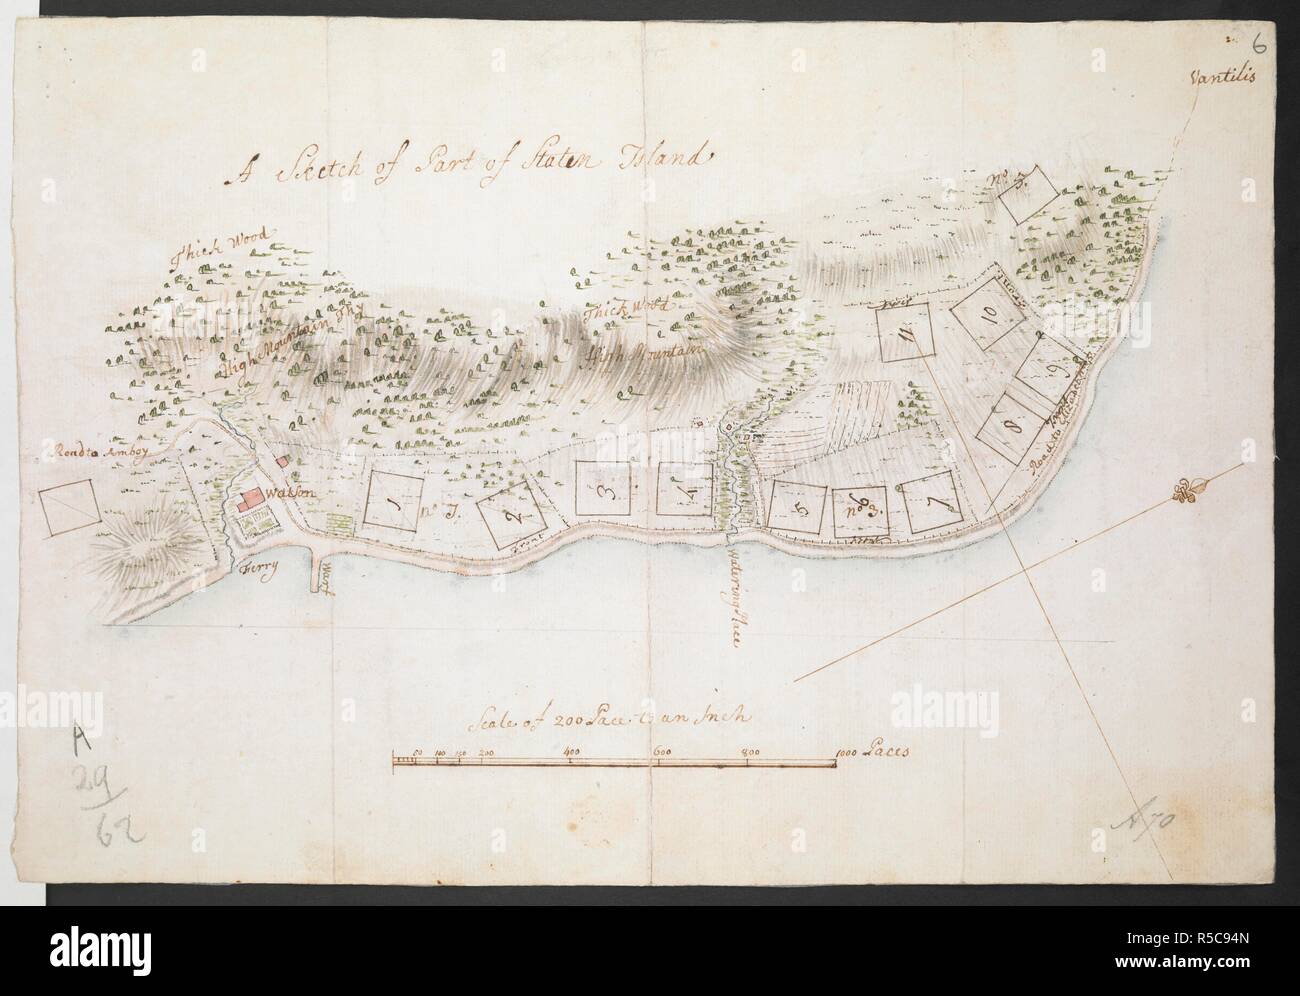 A sketch of part of Staten Island'; 18th cent.  . R.U.S.I. MAPS. Vol. LXXVI (1-13). 57711 (1-4). Places in states North-East of New York. 18th century. 1:12000. 'Scale of 200 paces to an inch'. Scale bar of 1000 paces (= 5 inches). Map oriented with West North-West at top. 245 x 360mm. Source: Add. 57711.6 Amherst no. A 70. R.U.S.I. no. A 29.62. Stock Photo